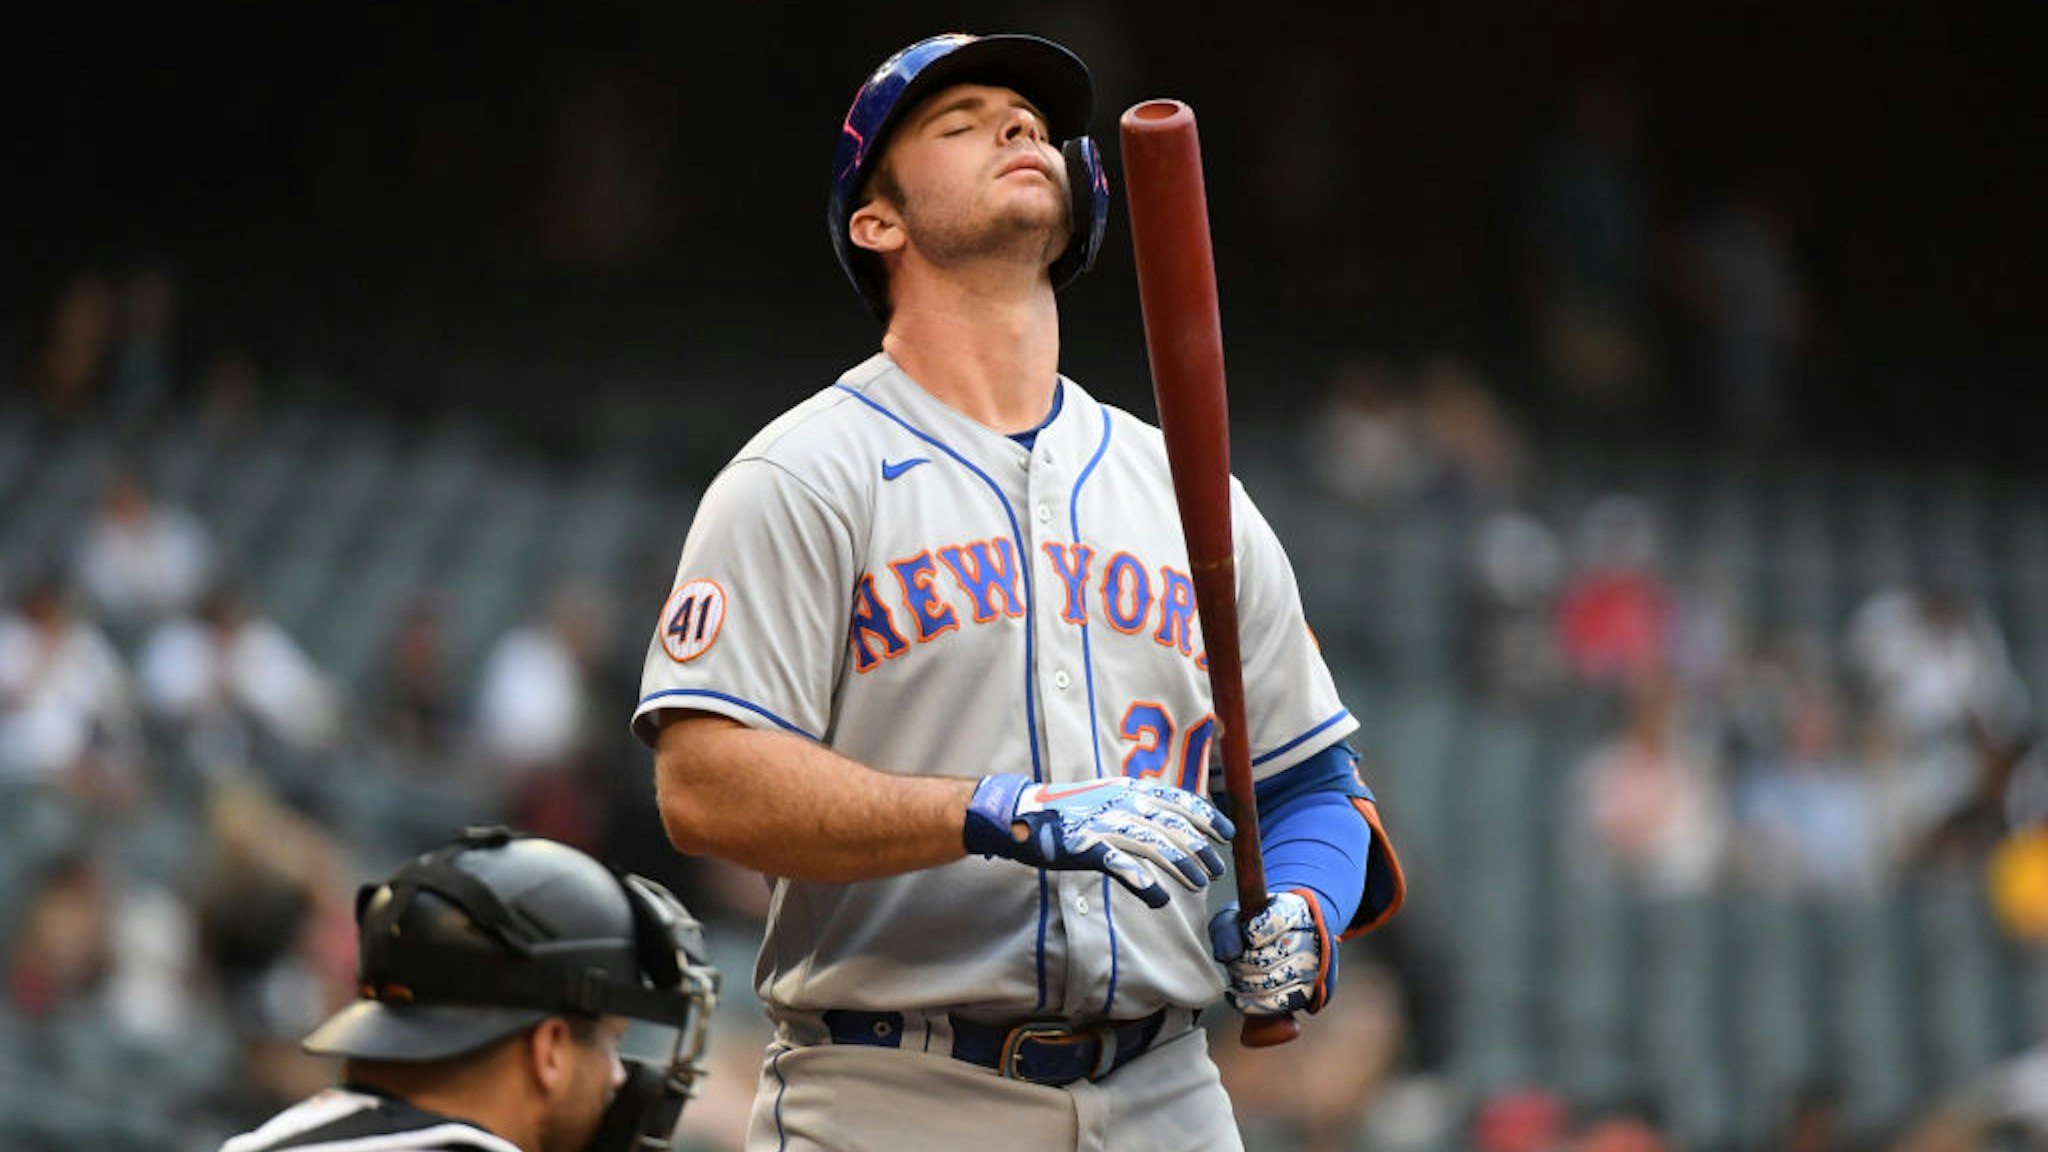 PHOENIX, ARIZONA - JUNE 01: Pete Alonso #20 of the New York Mets gets ready in the batters box against the Arizona Diamondbacks at Chase Field on June 01, 2021 in Phoenix, Arizona. (Photo by Norm Hall/Getty Images)